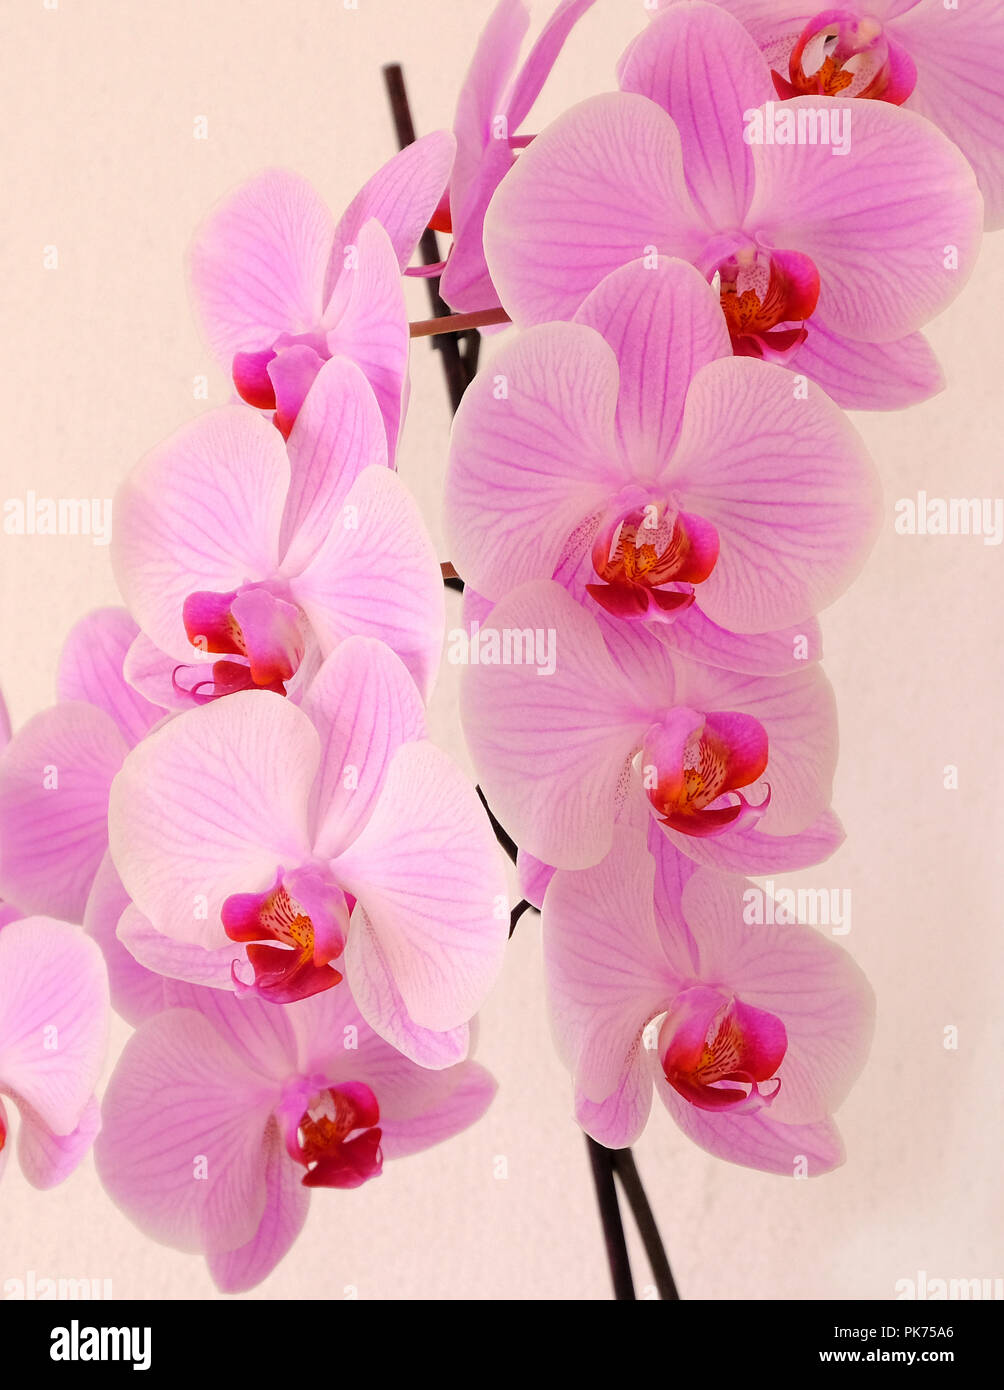 Large blooms of the Moth Orchid on white textured background Stock Photo